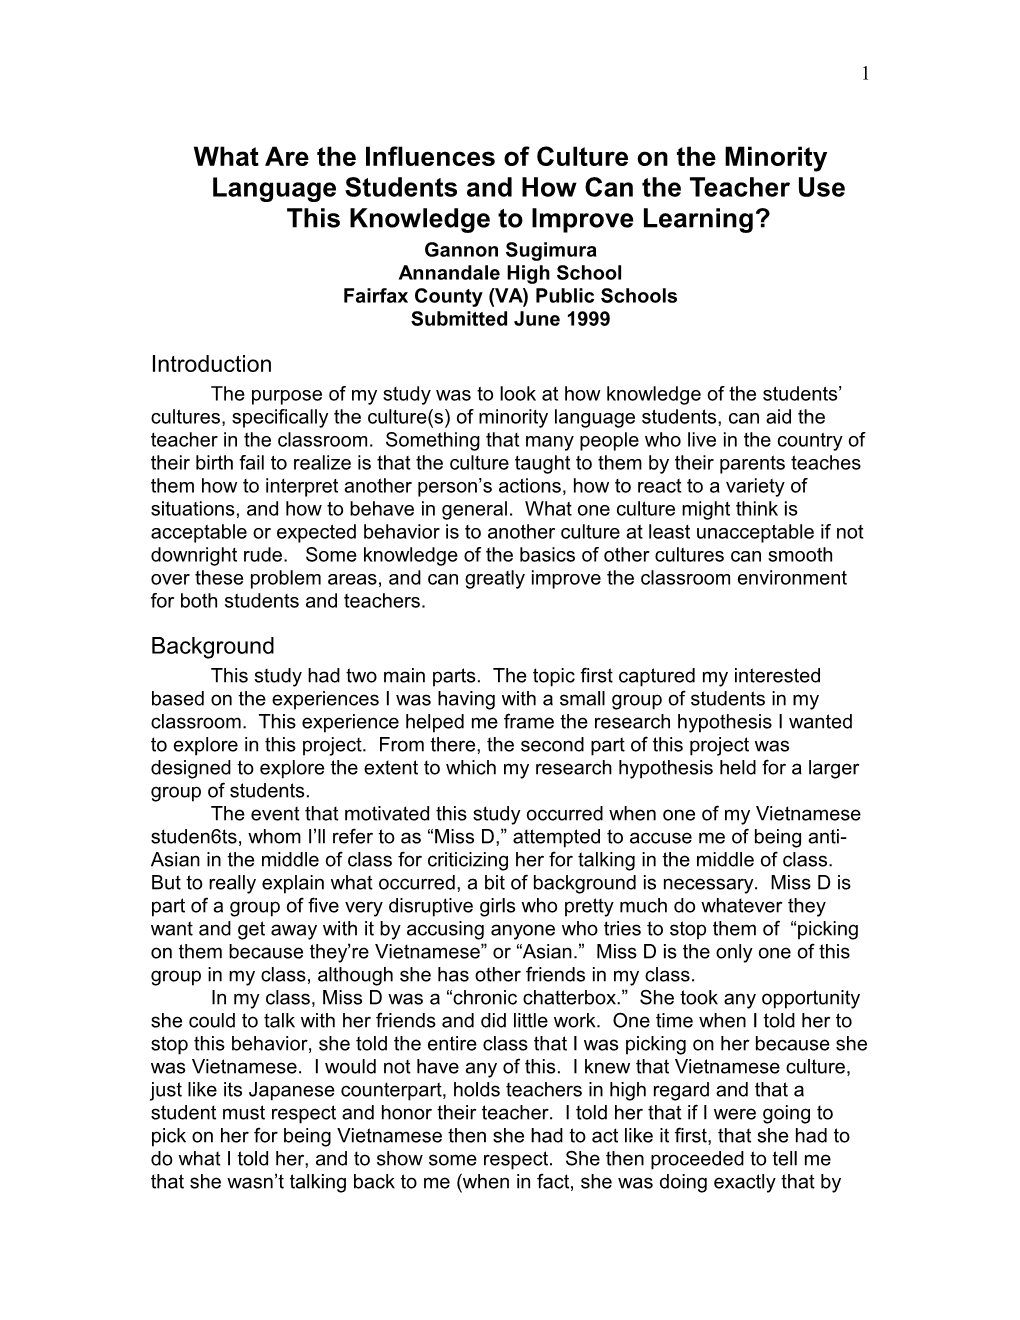 What Are the Influences of Culture on the Minority Language Student and How Can the Teacher